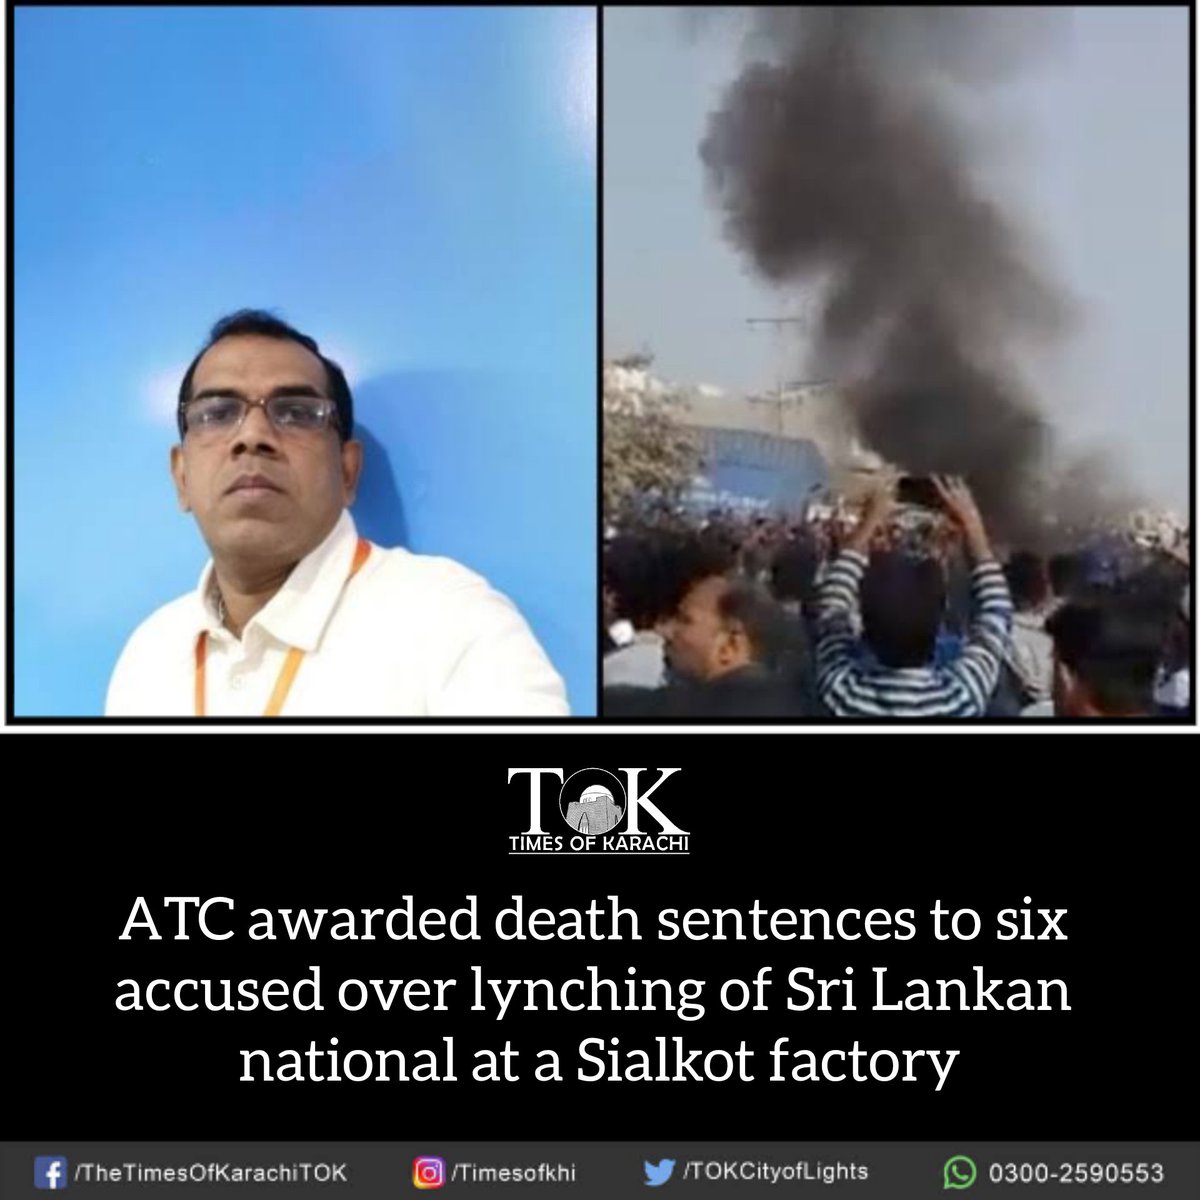 BREAKING | An Anti-Terrorism Court (ATC) sentenced six men to death for lynching the Sri Lankan manager of a factory in #Sialkot - Court also gave life sentences to seven others, while 67 people were sentenced to two years each for involvement in the lynching.

#PriyanthaKumara